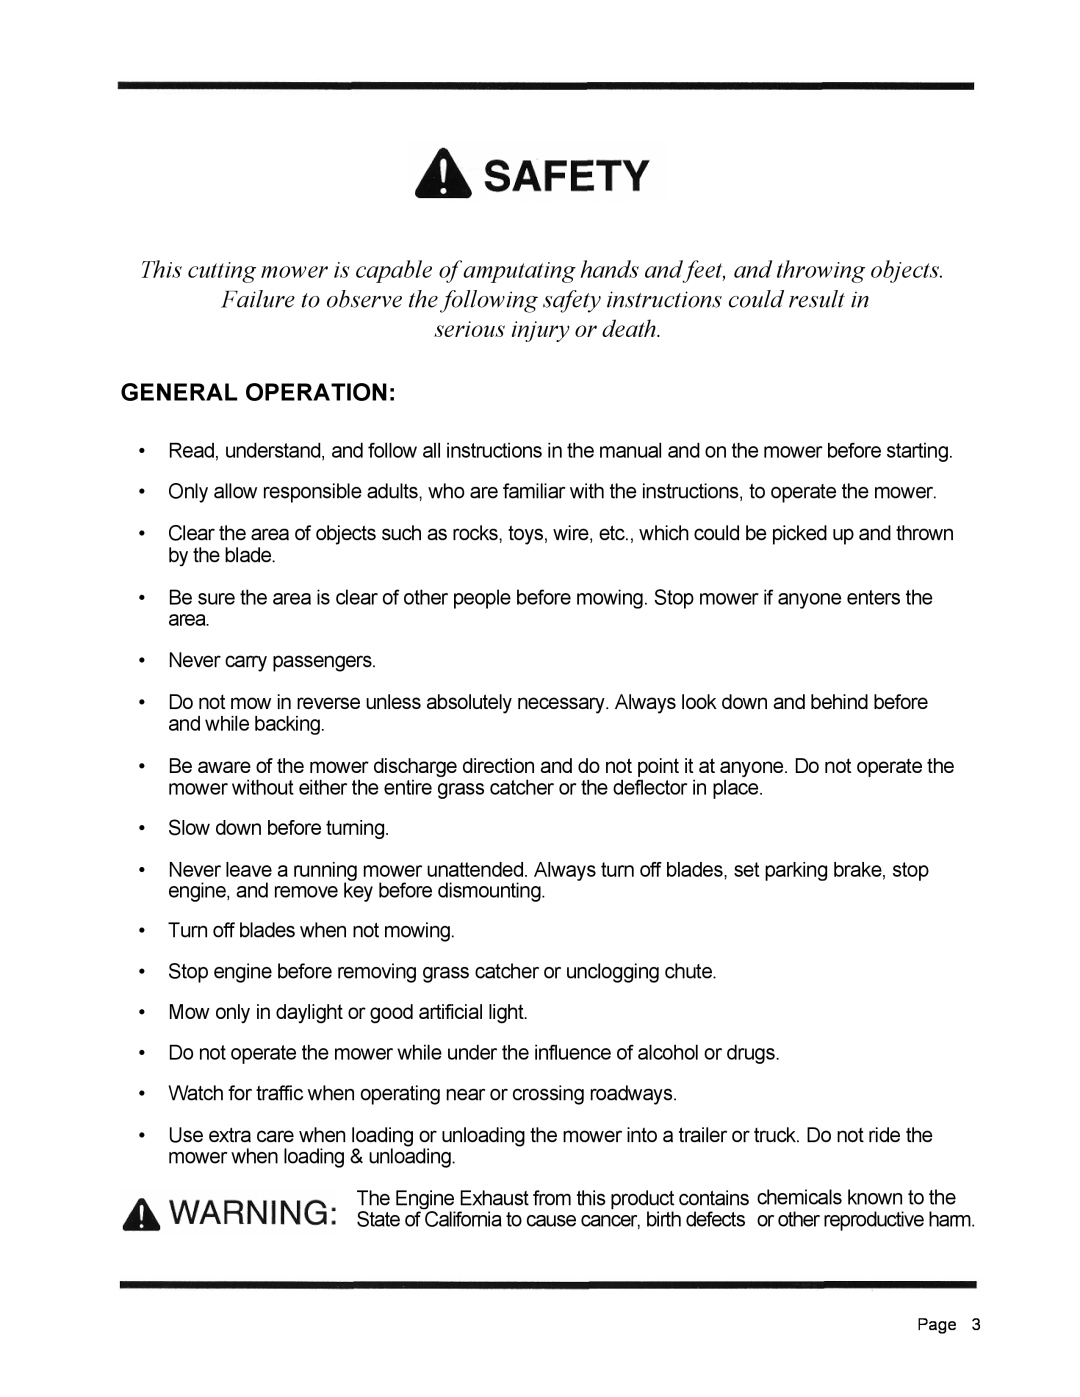 Dixon 3000 Series manual serious injury or death, General Operation 